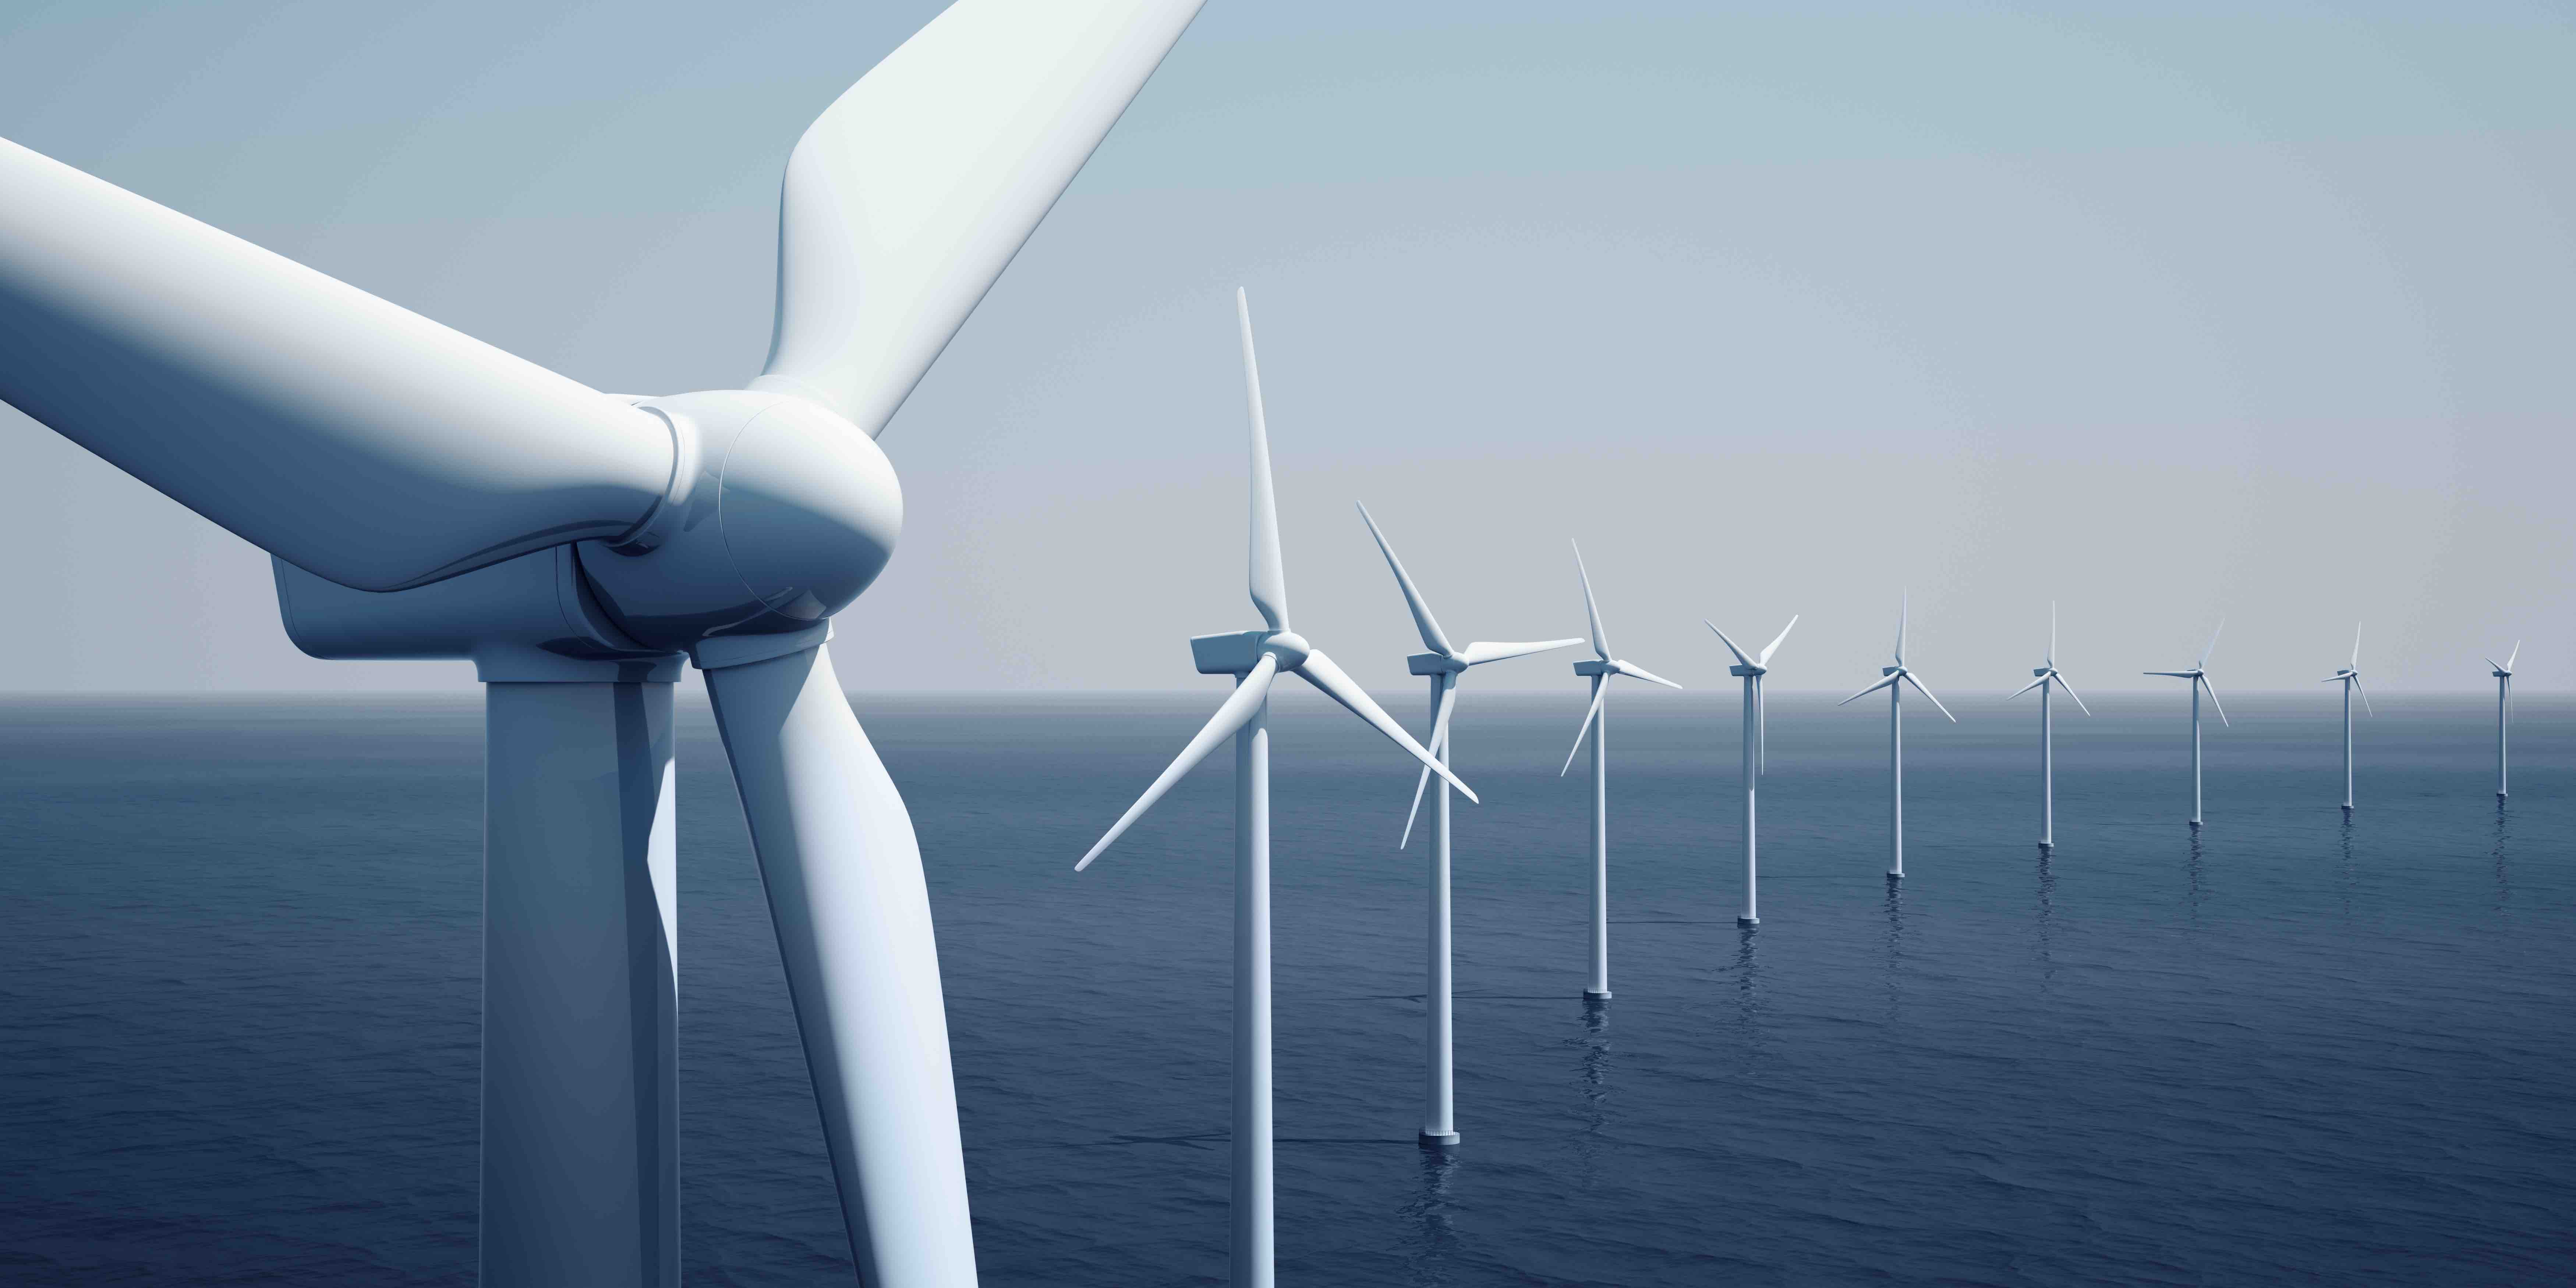 PGE Management Board closes projects outside its core business. Offshore wind still on top - MarinePoland.com